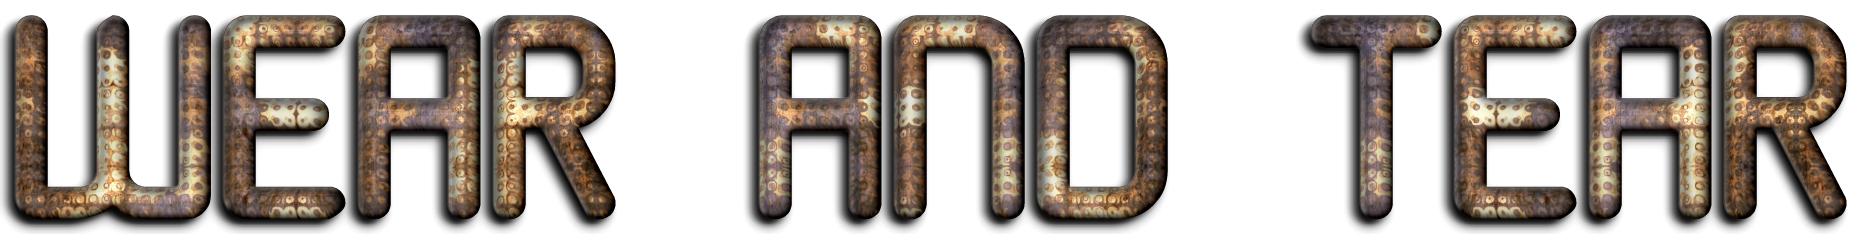 3d_rusty_metal_text_effect.png